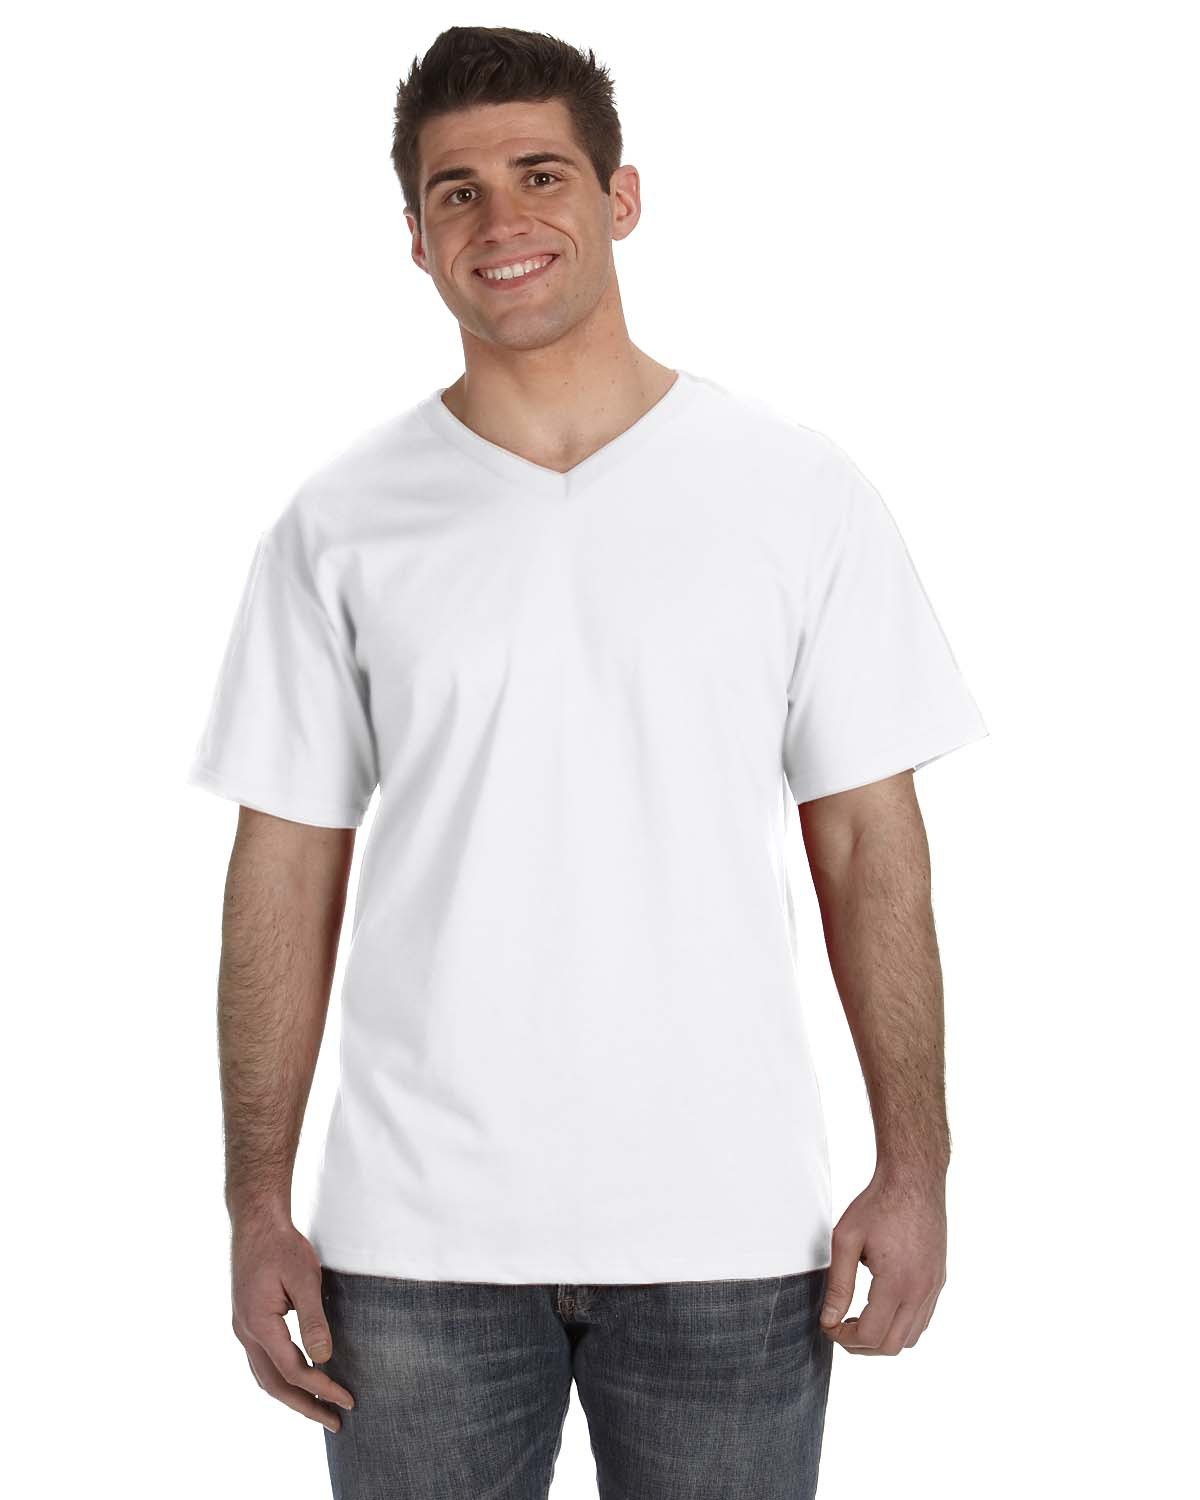 Adult Hd Cotton™ V-Neck T-Shirt-Fruit of the Loom